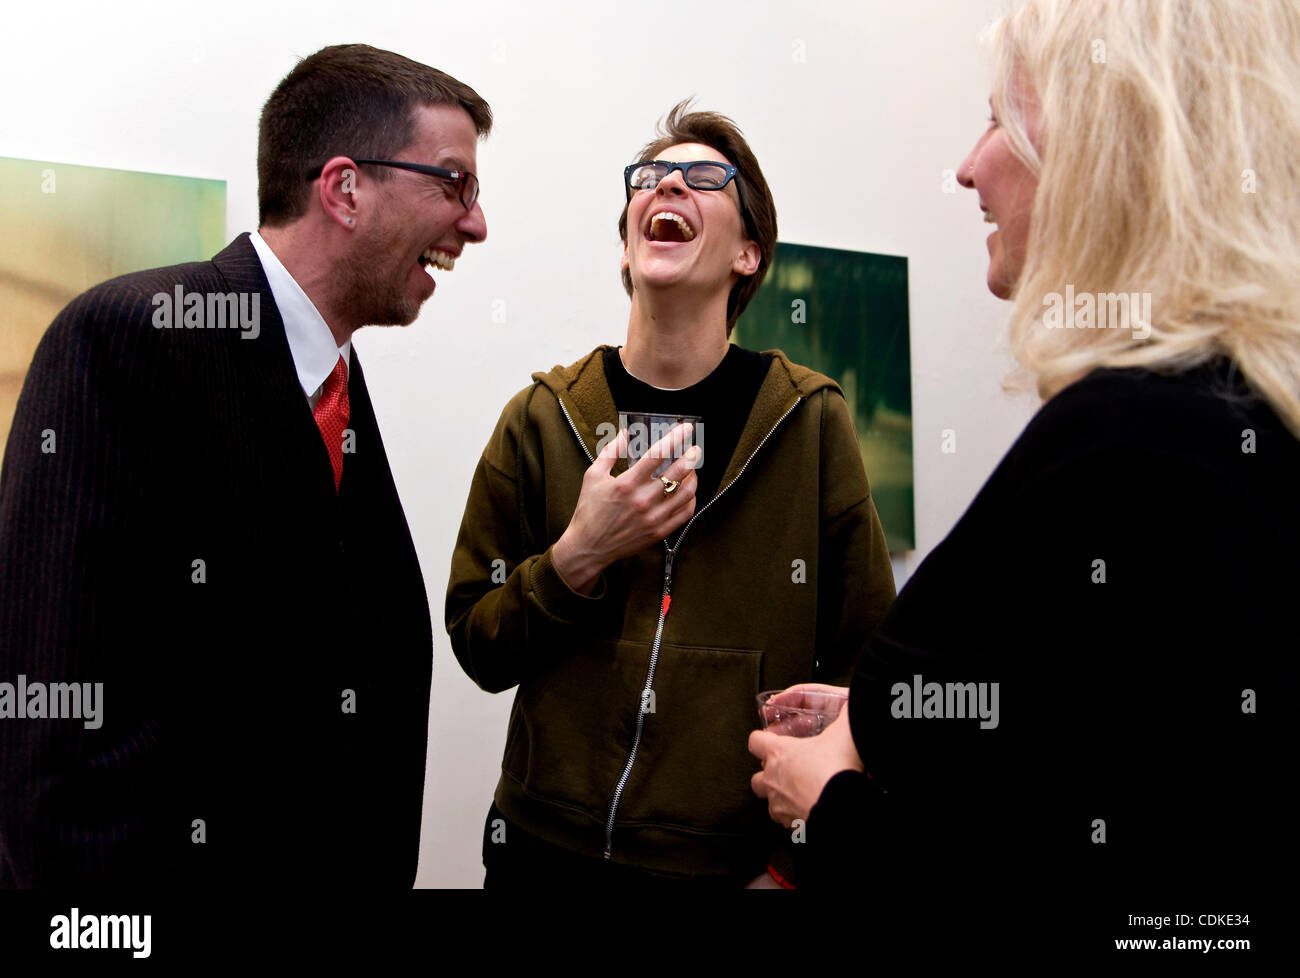 Mar.17, 2011 - San Francisco, California, USA - MICHAEL KUSEK, RACHEL MADDOW and her partner SUSAN MIKULA at the opening reception for Ms. Mikula's 'American Vale' series of Polaroid photographs at the George Lawson Gallery. Stock Photo